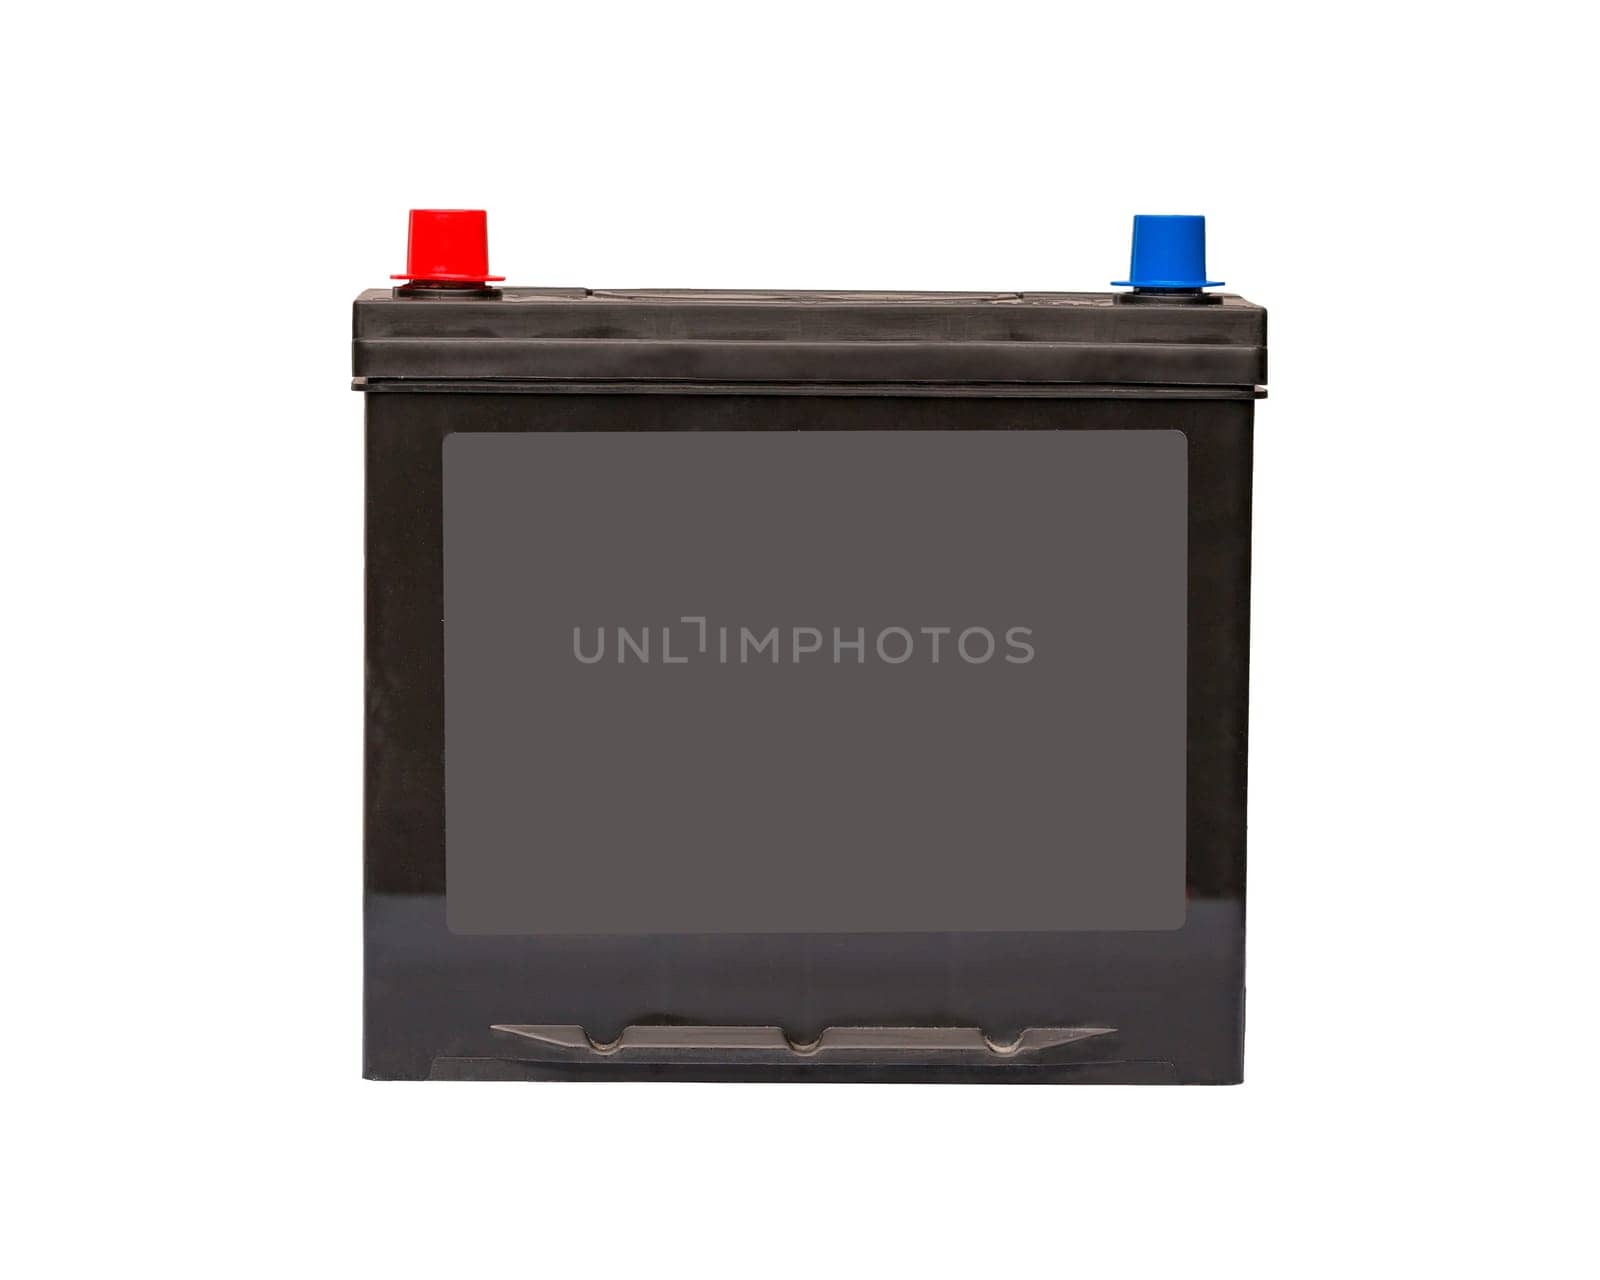 black car battery closeup on a white background, front view by A_Karim